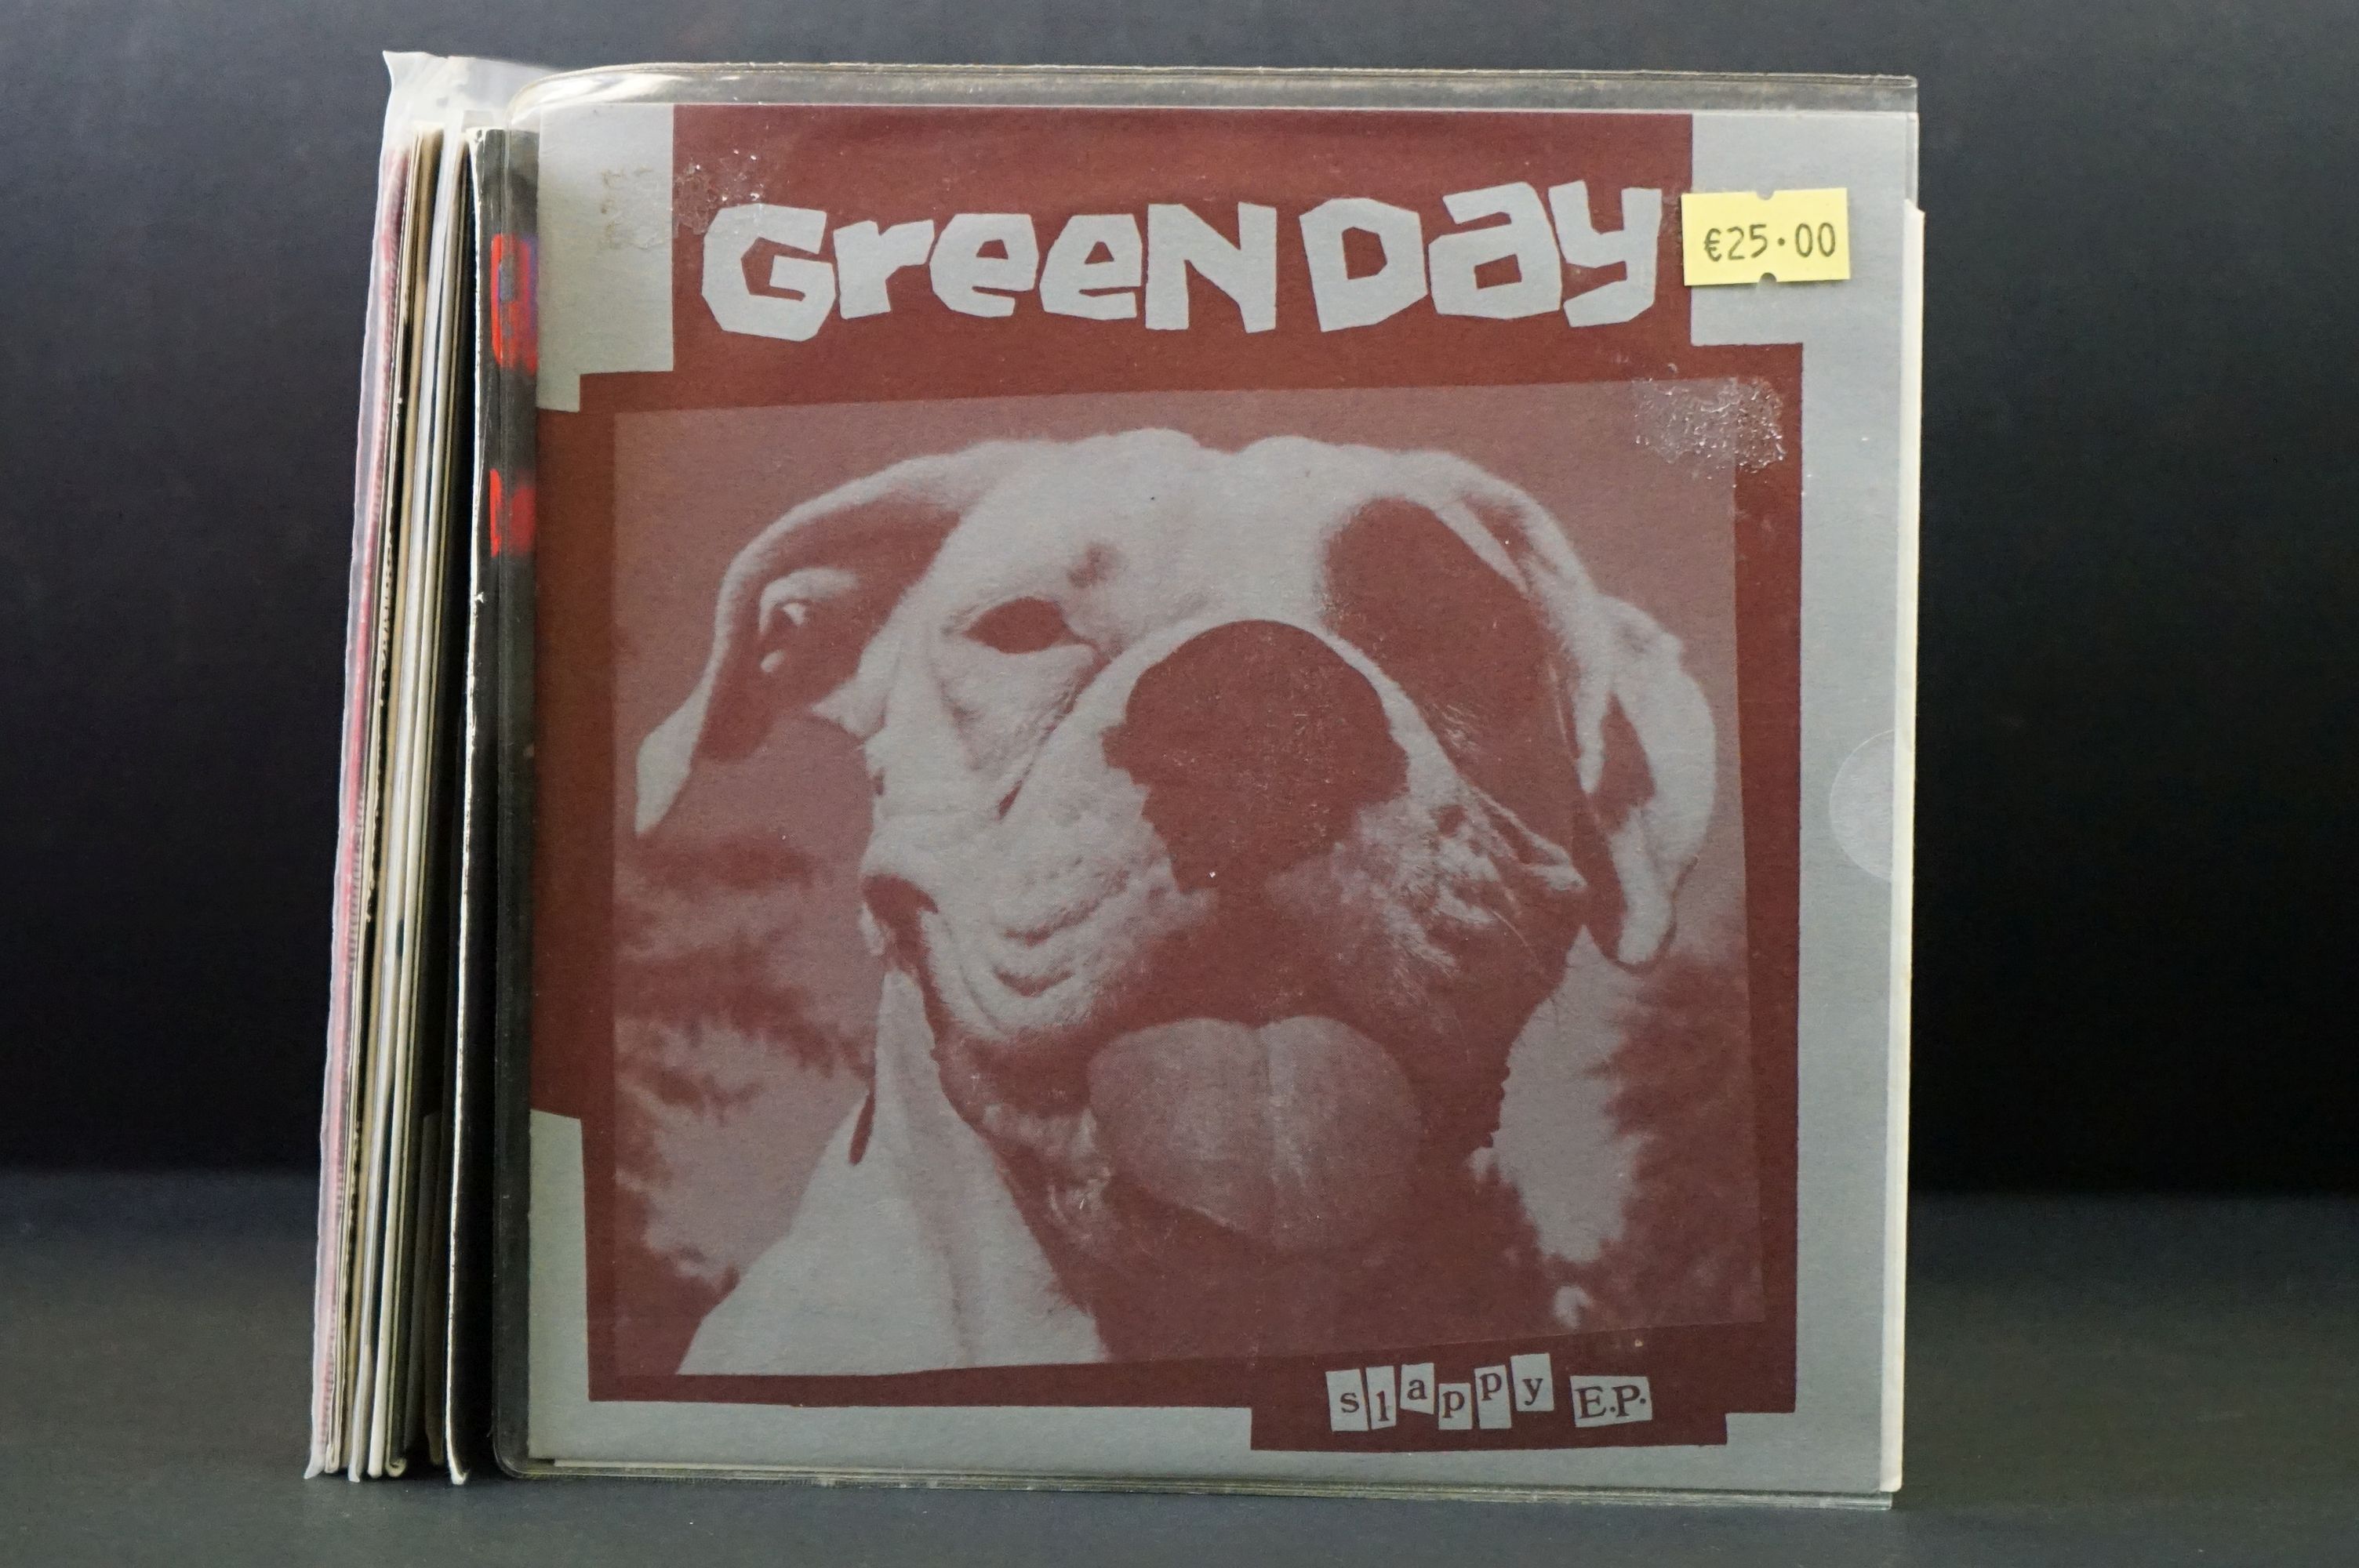 Vinyl – 9 Punk / Alternative 7” singles by mainly US bands to include: Green Day – Slappy E.P. (US